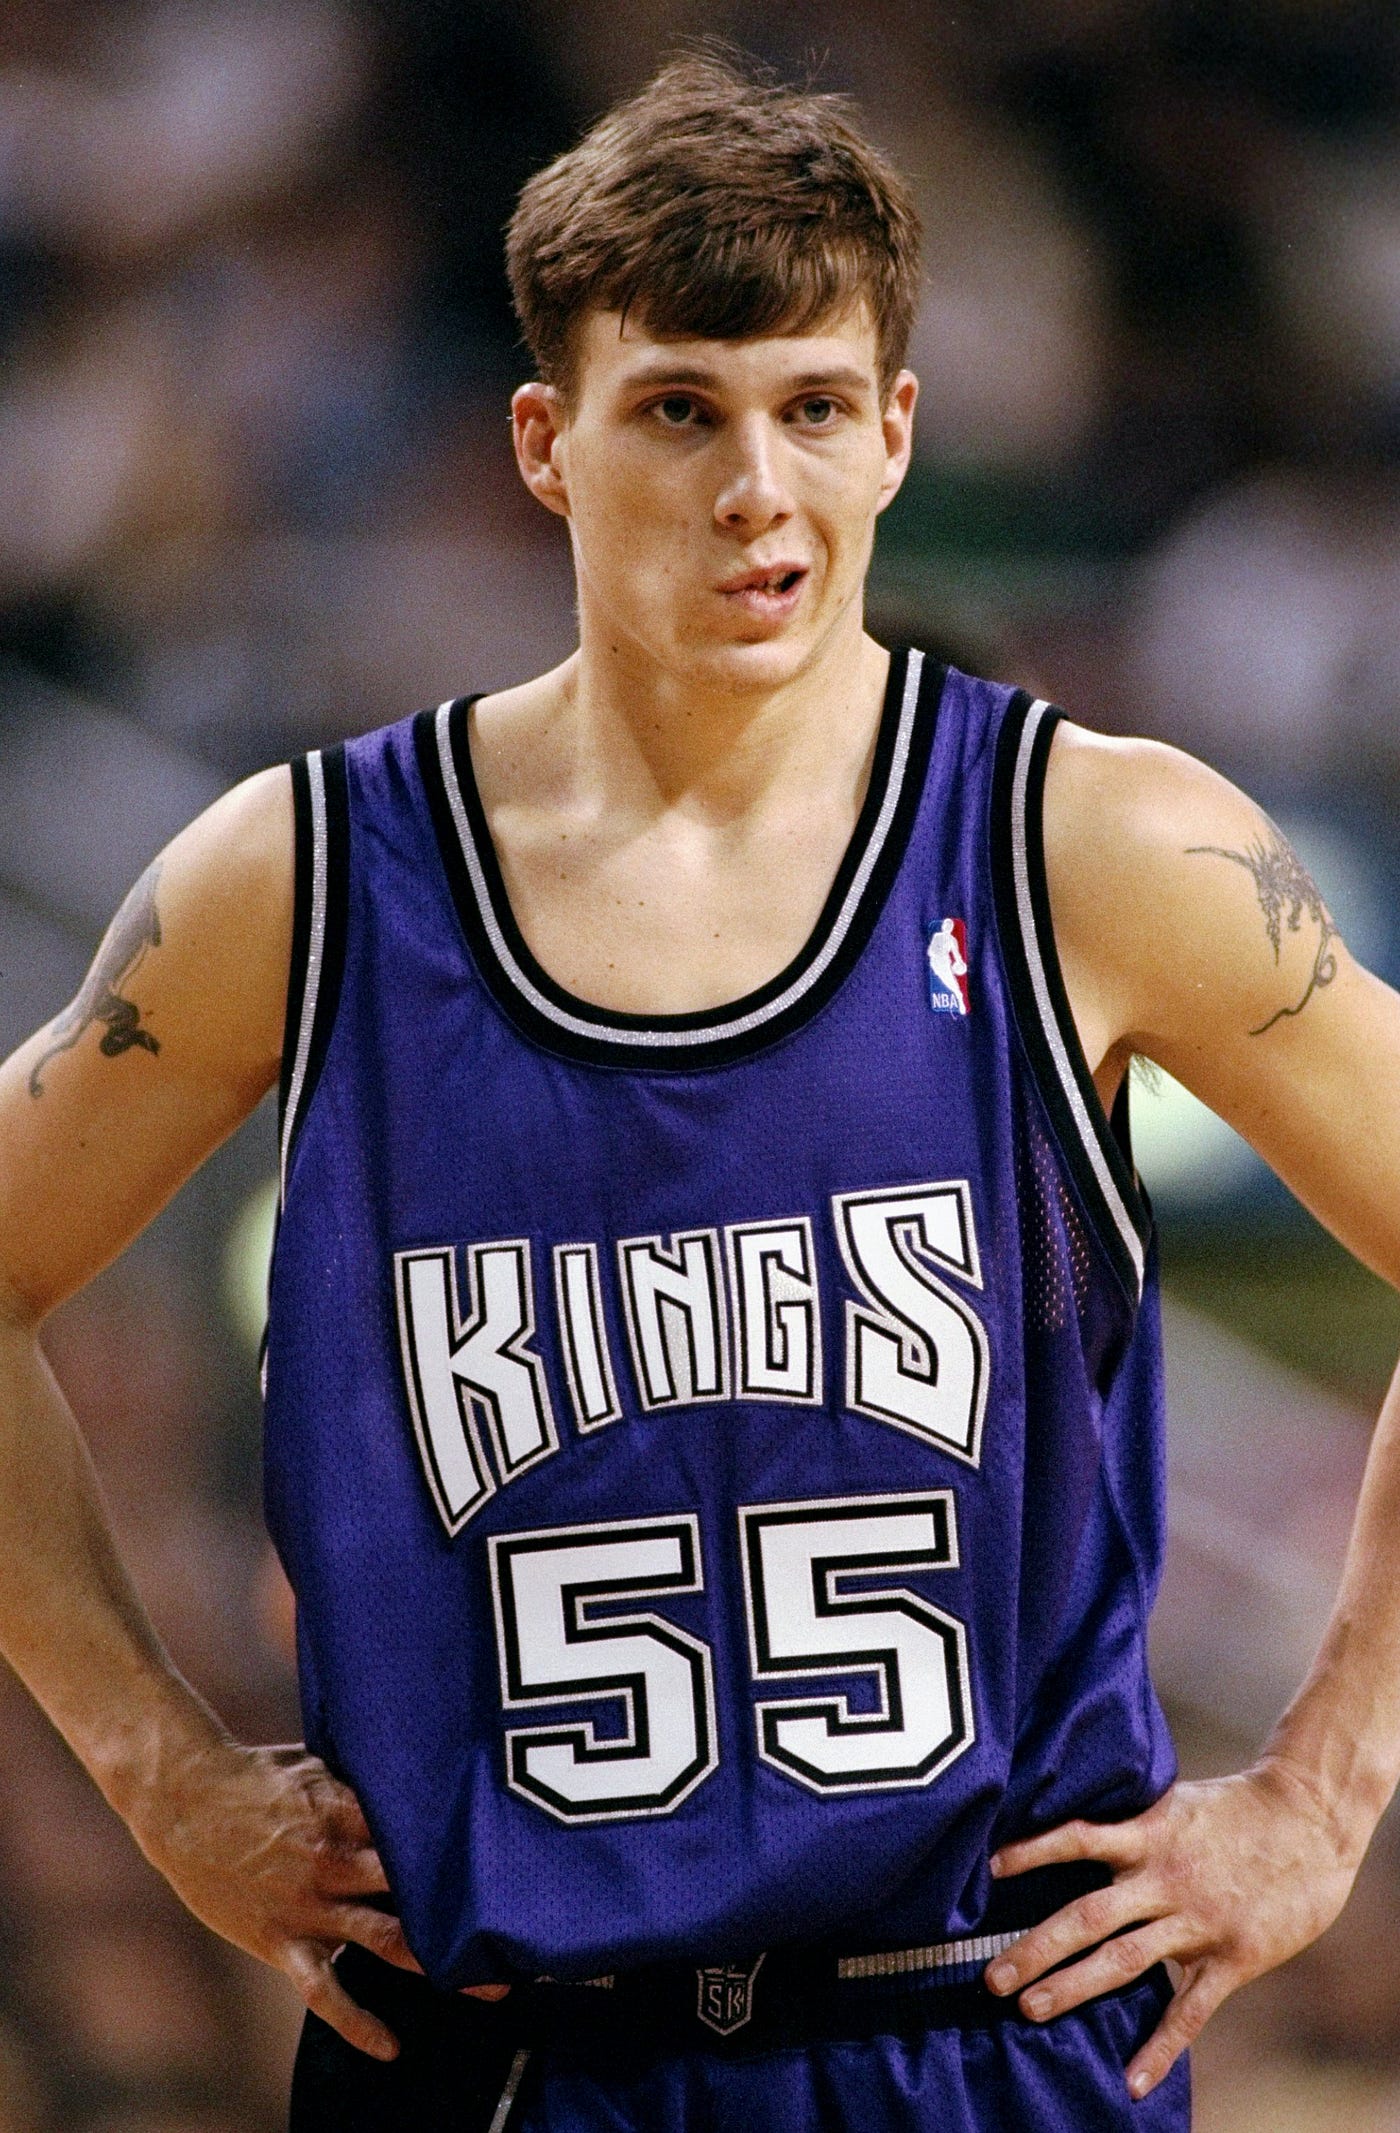 The NBA Just Released the Best Jason 'White Chocolate' Williams